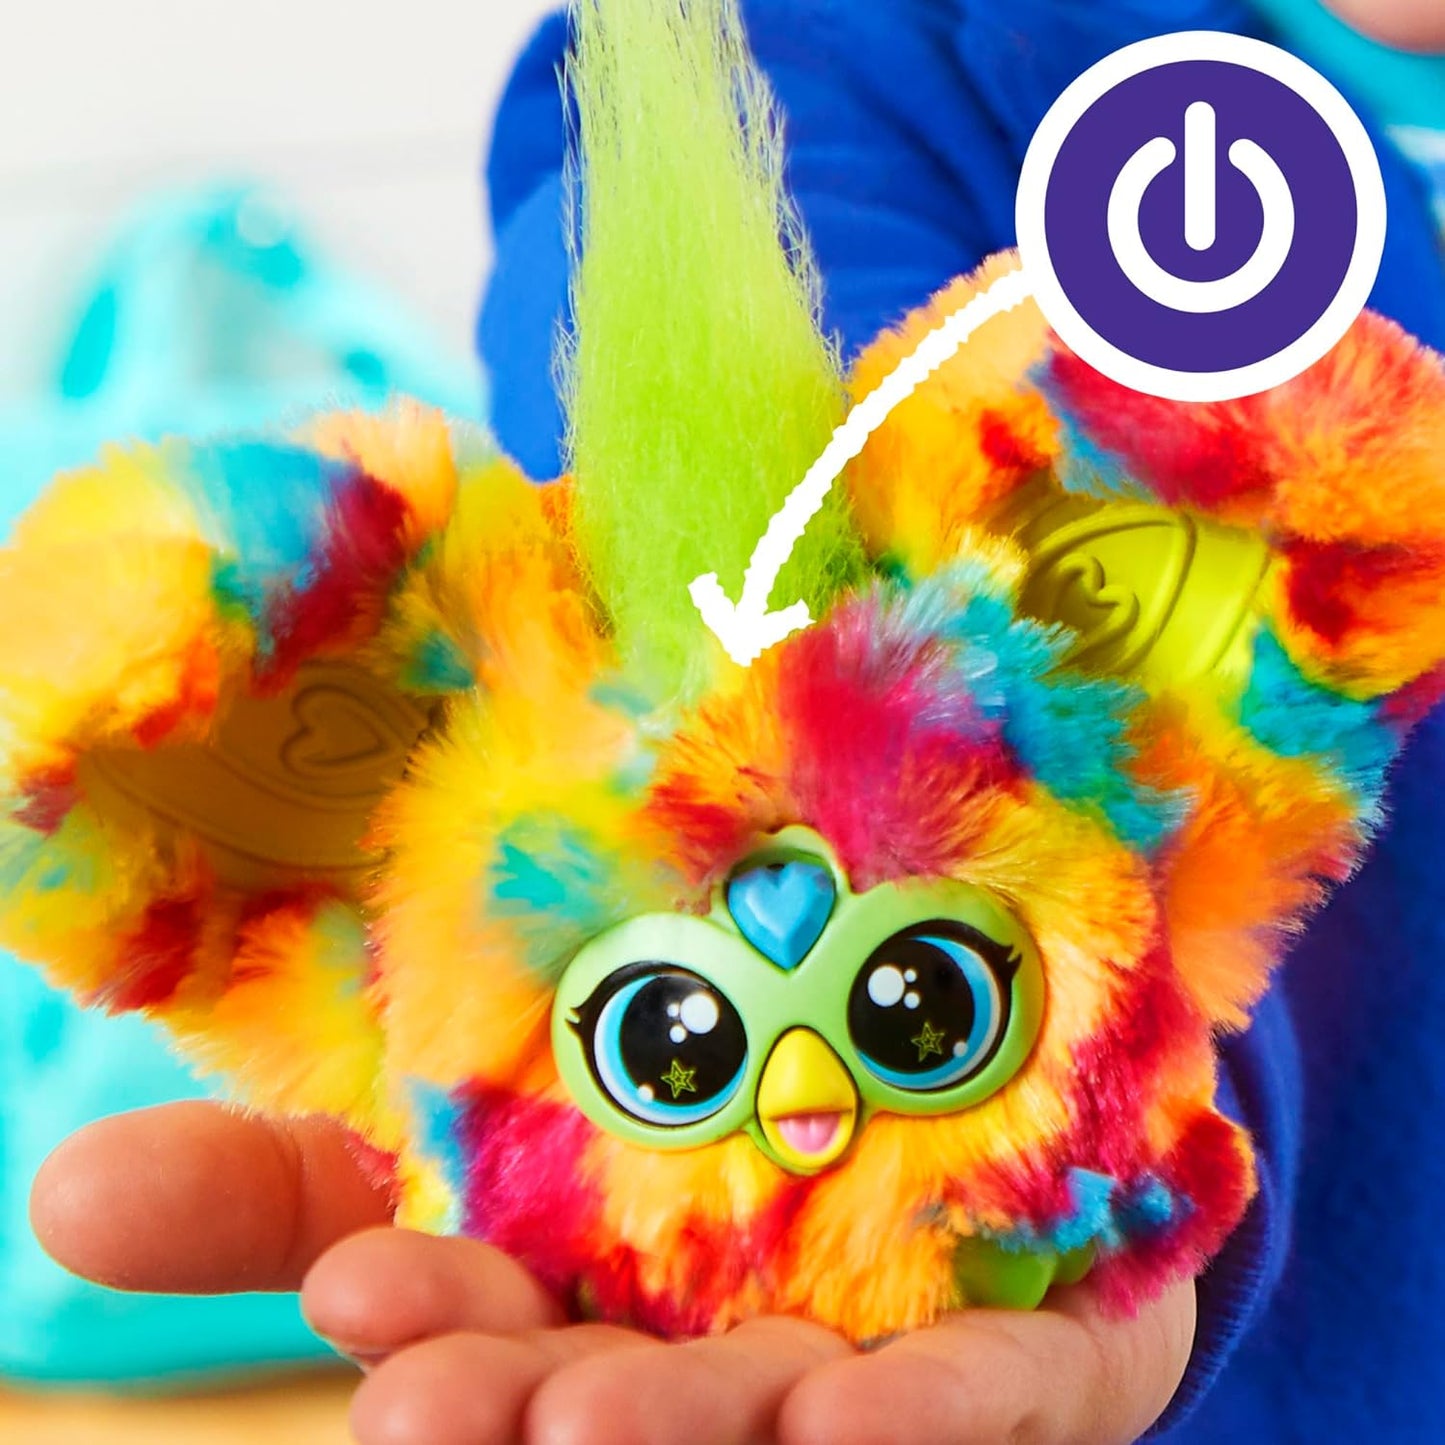 Furby Furblets Pix-Elle Mini Friend, 45+ Sounds, Gamer Music & Furbish Phrases, Electronic Plush Toys for Girls & Boys 6 Years & Up, Multicolor